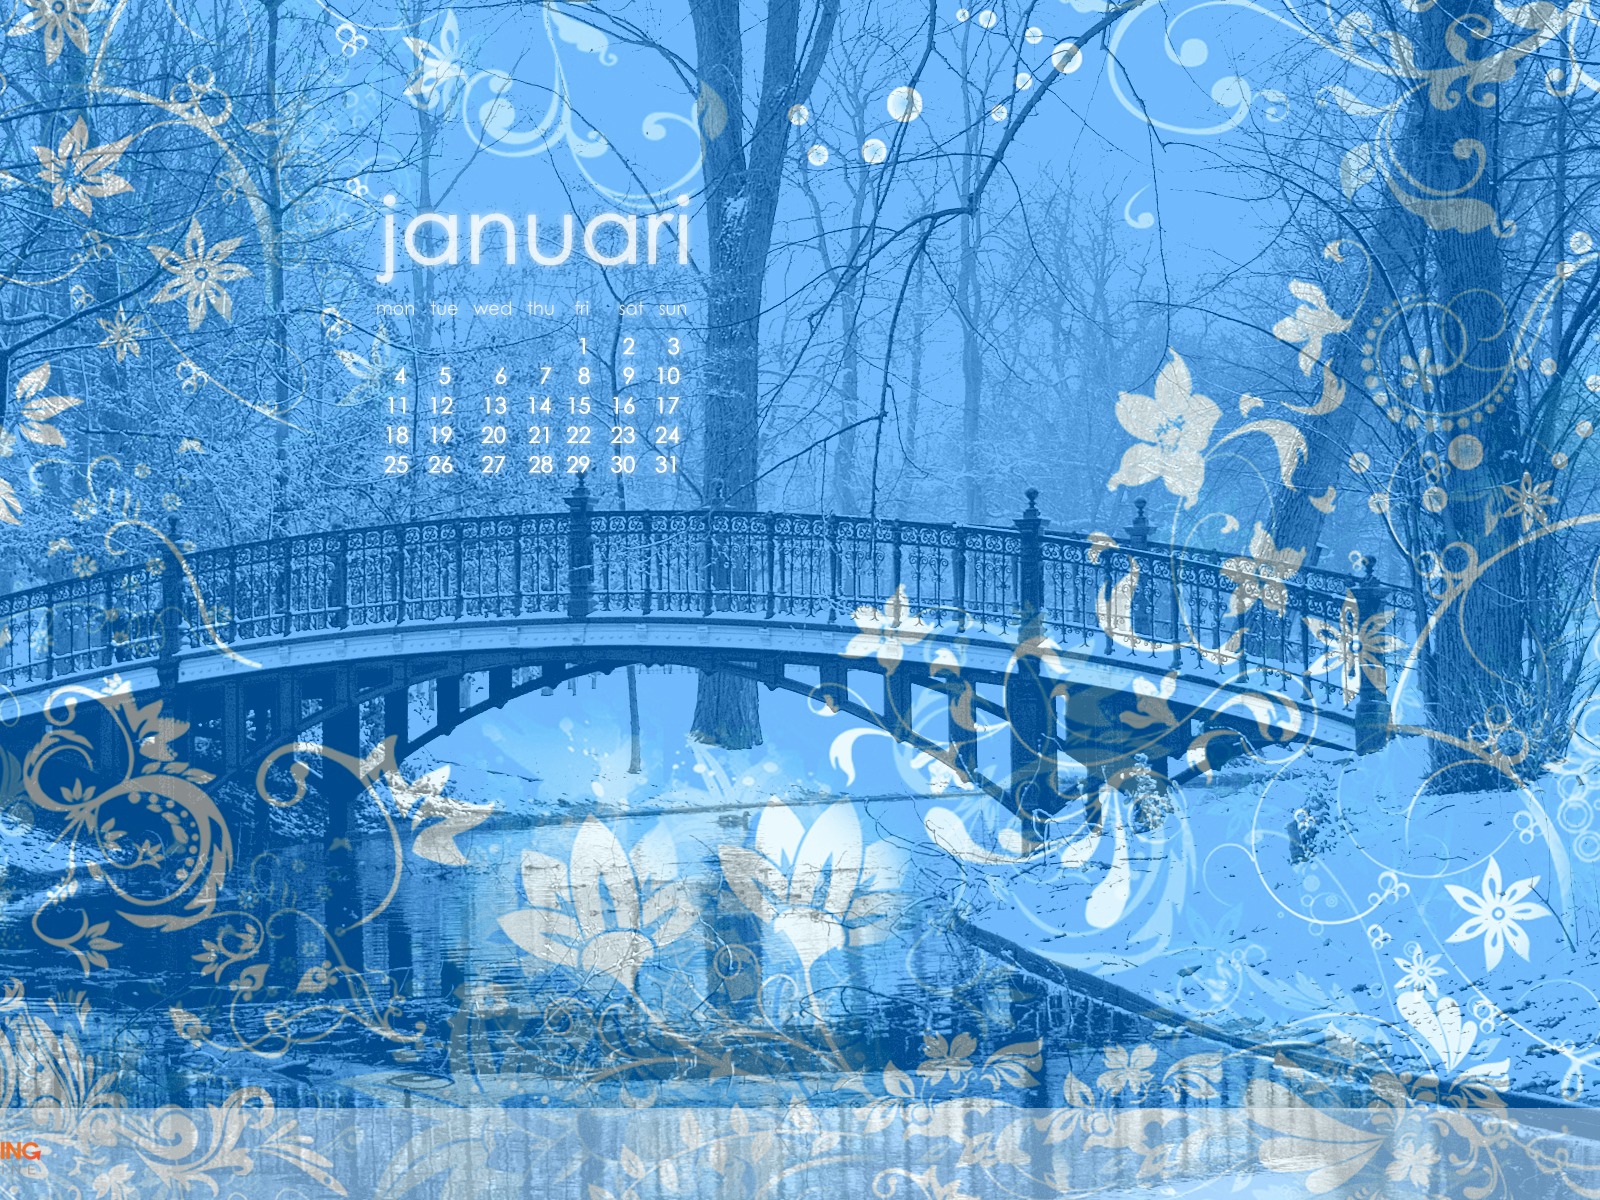 Microsoft Official Win7 New Year Wallpapers #7 - 1600x1200